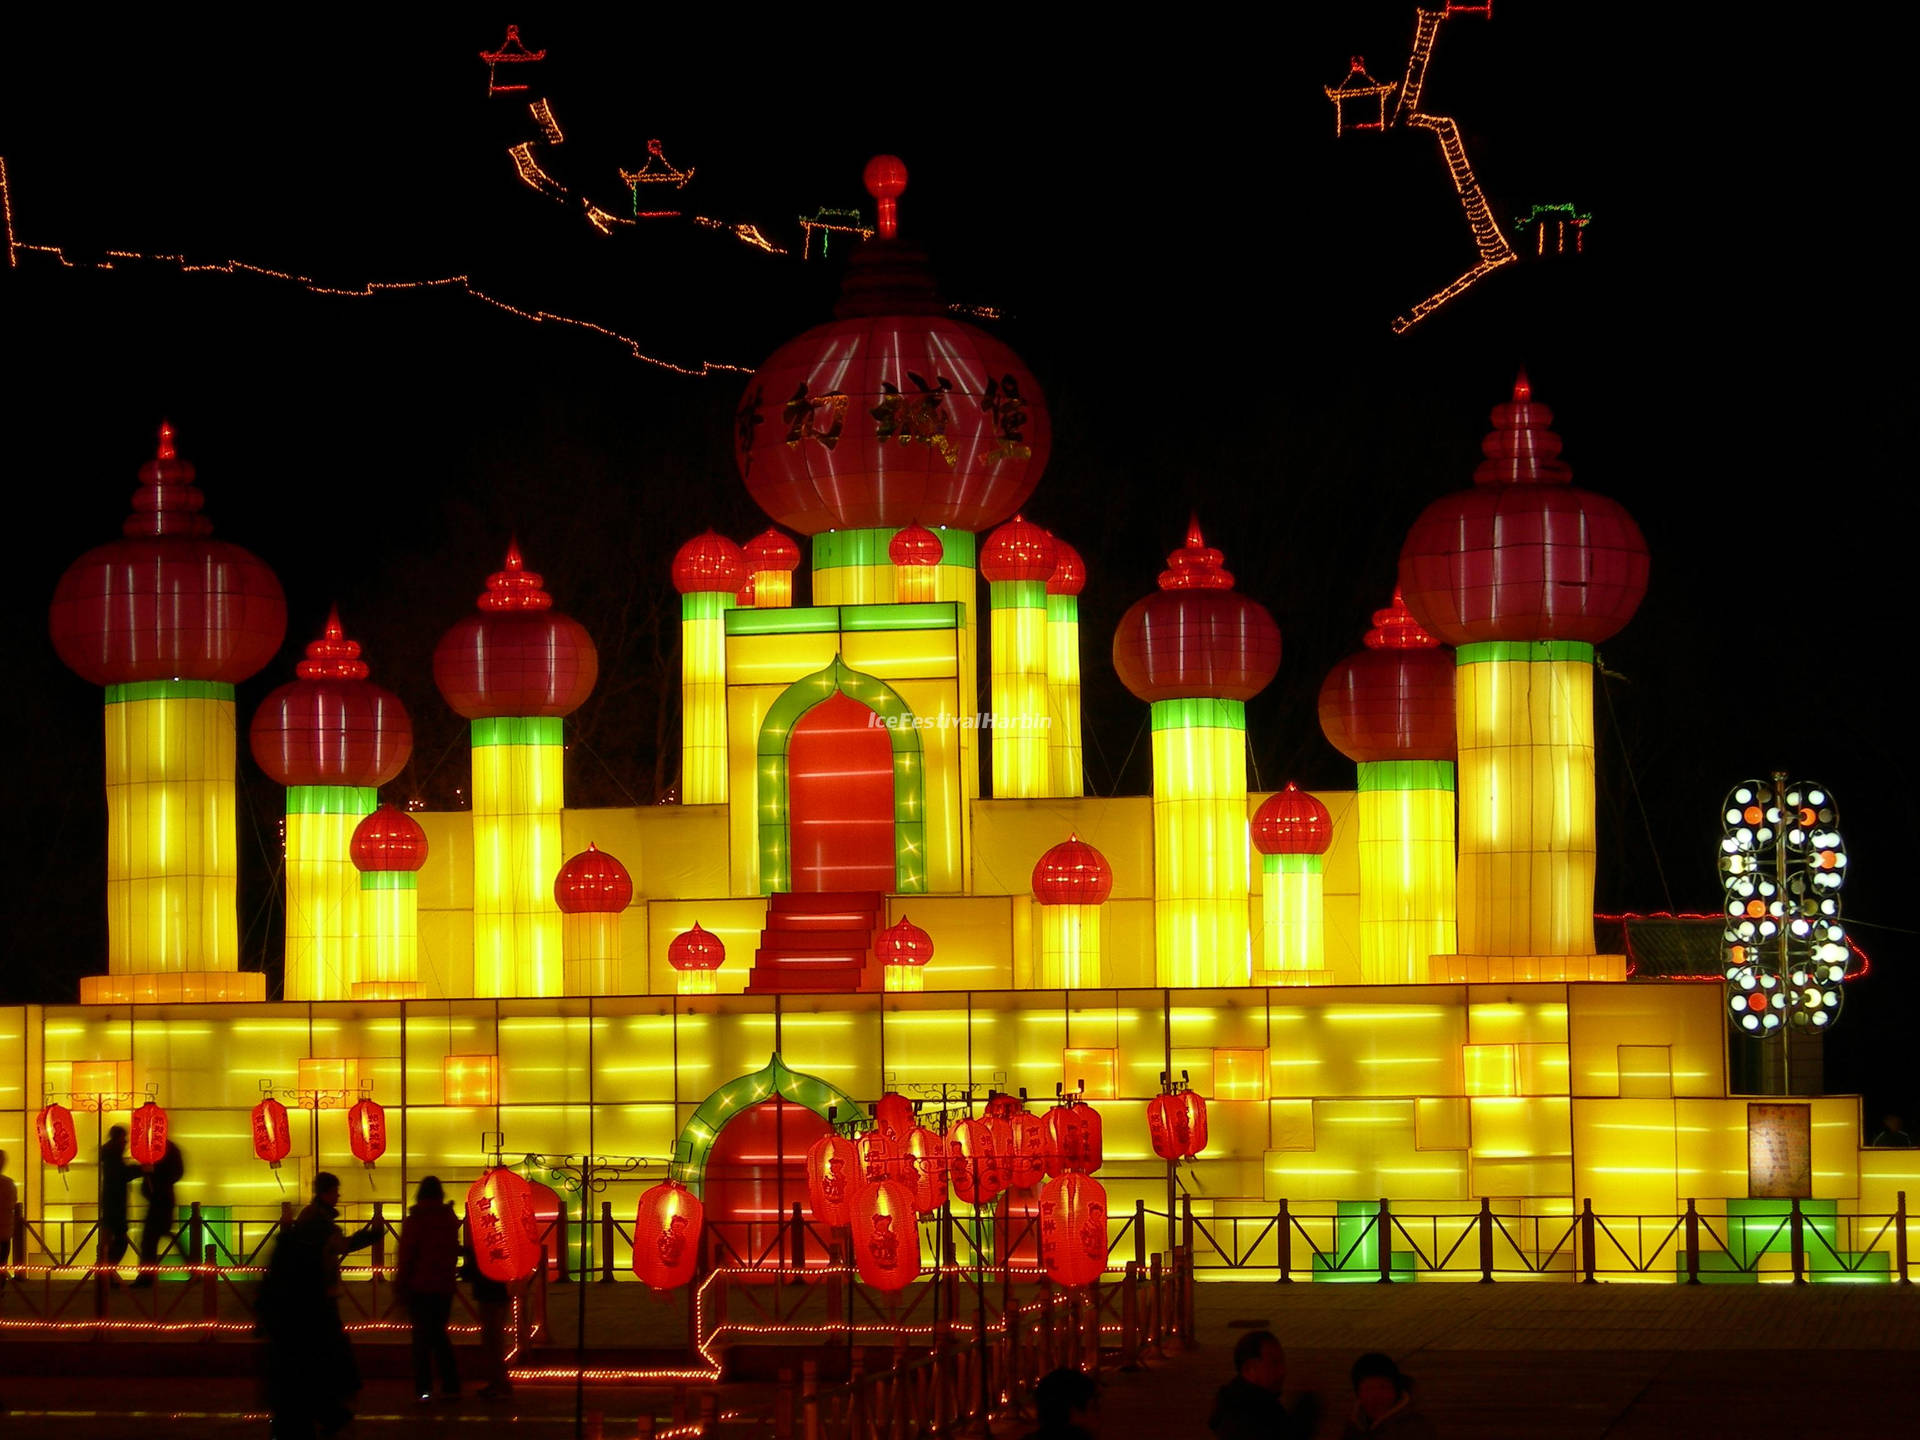 Harbin's Dazzling Ice Palace Aglow At Night Background